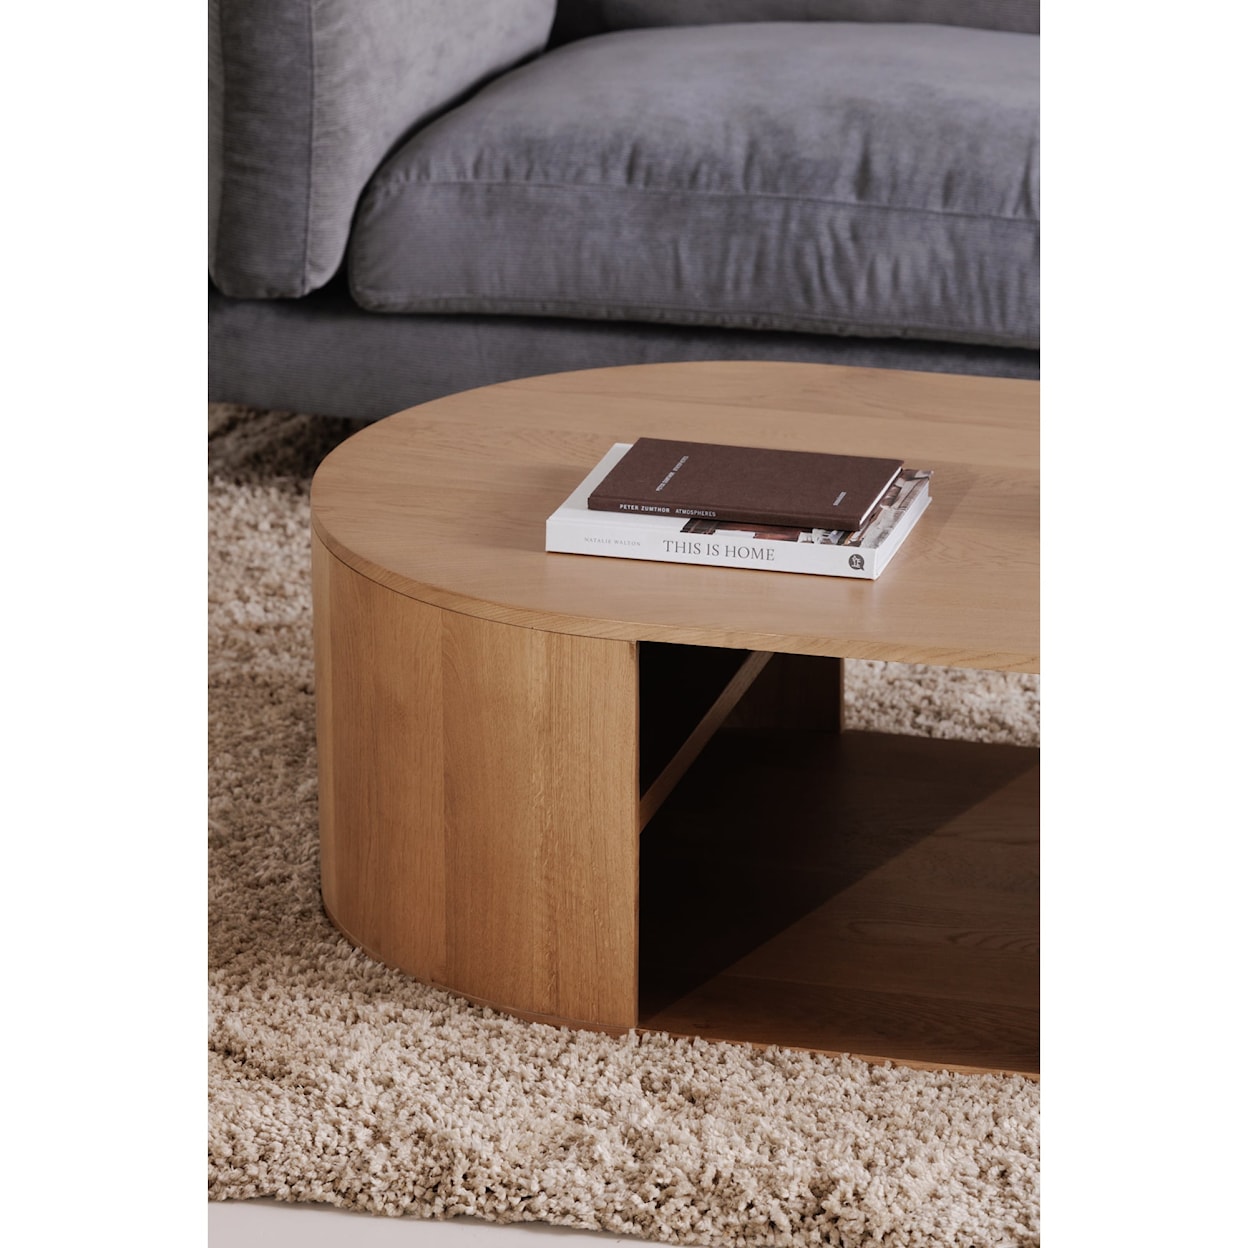 Moe's Home Collection Theo Coffee Table